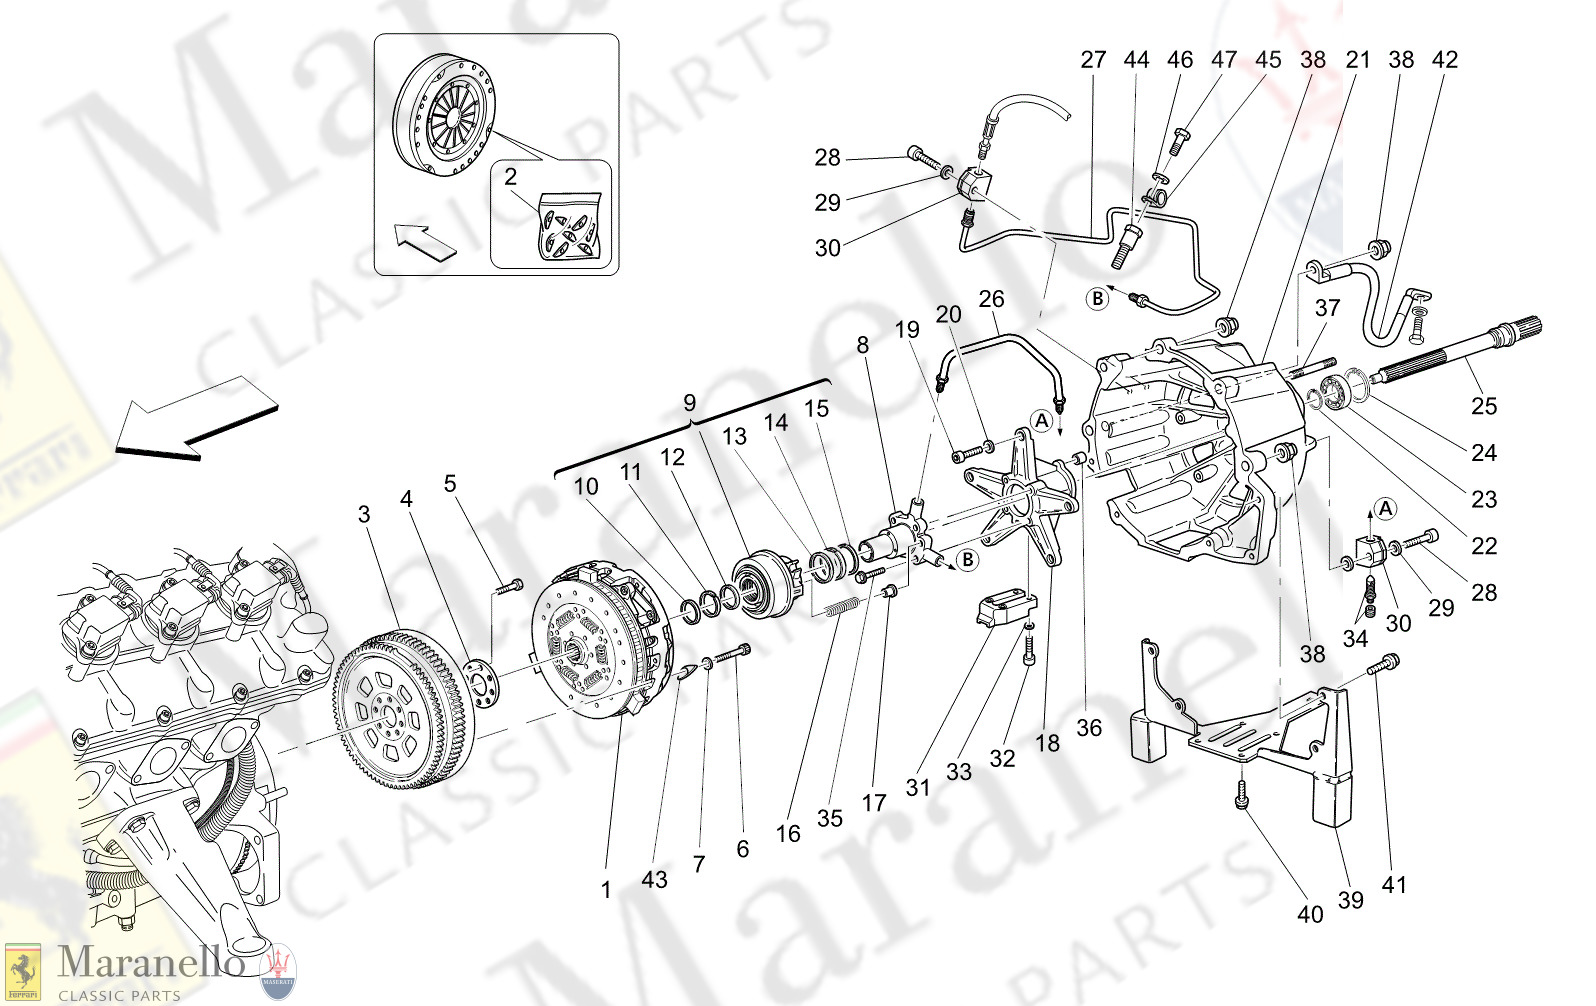 M2.10 - 12 - M210 - 12 Clutch Discs And Housing For Mechanical Gearbox